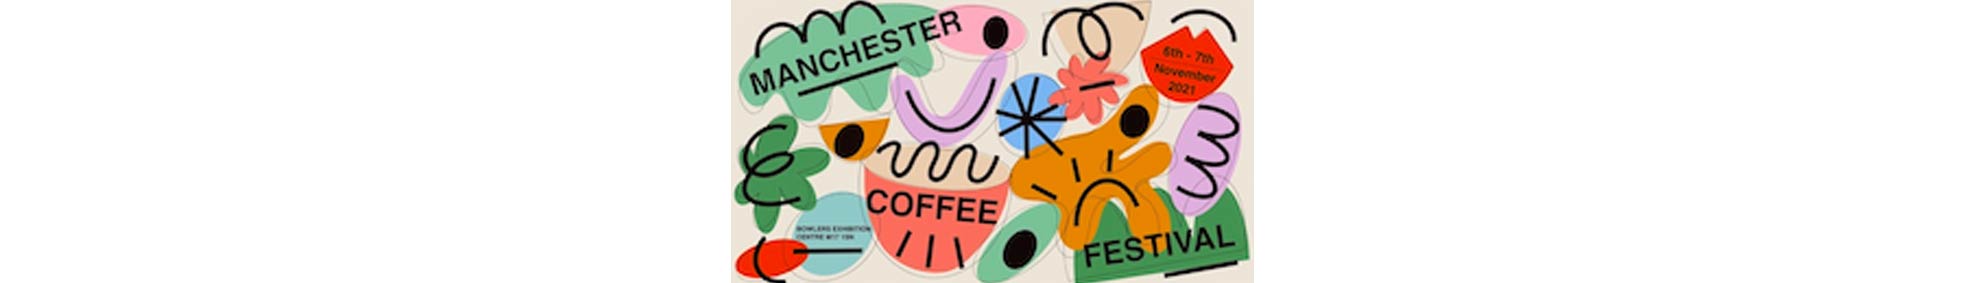 UK Best Coffee Subscription Dog and Hat at Manchester Coffee Festival